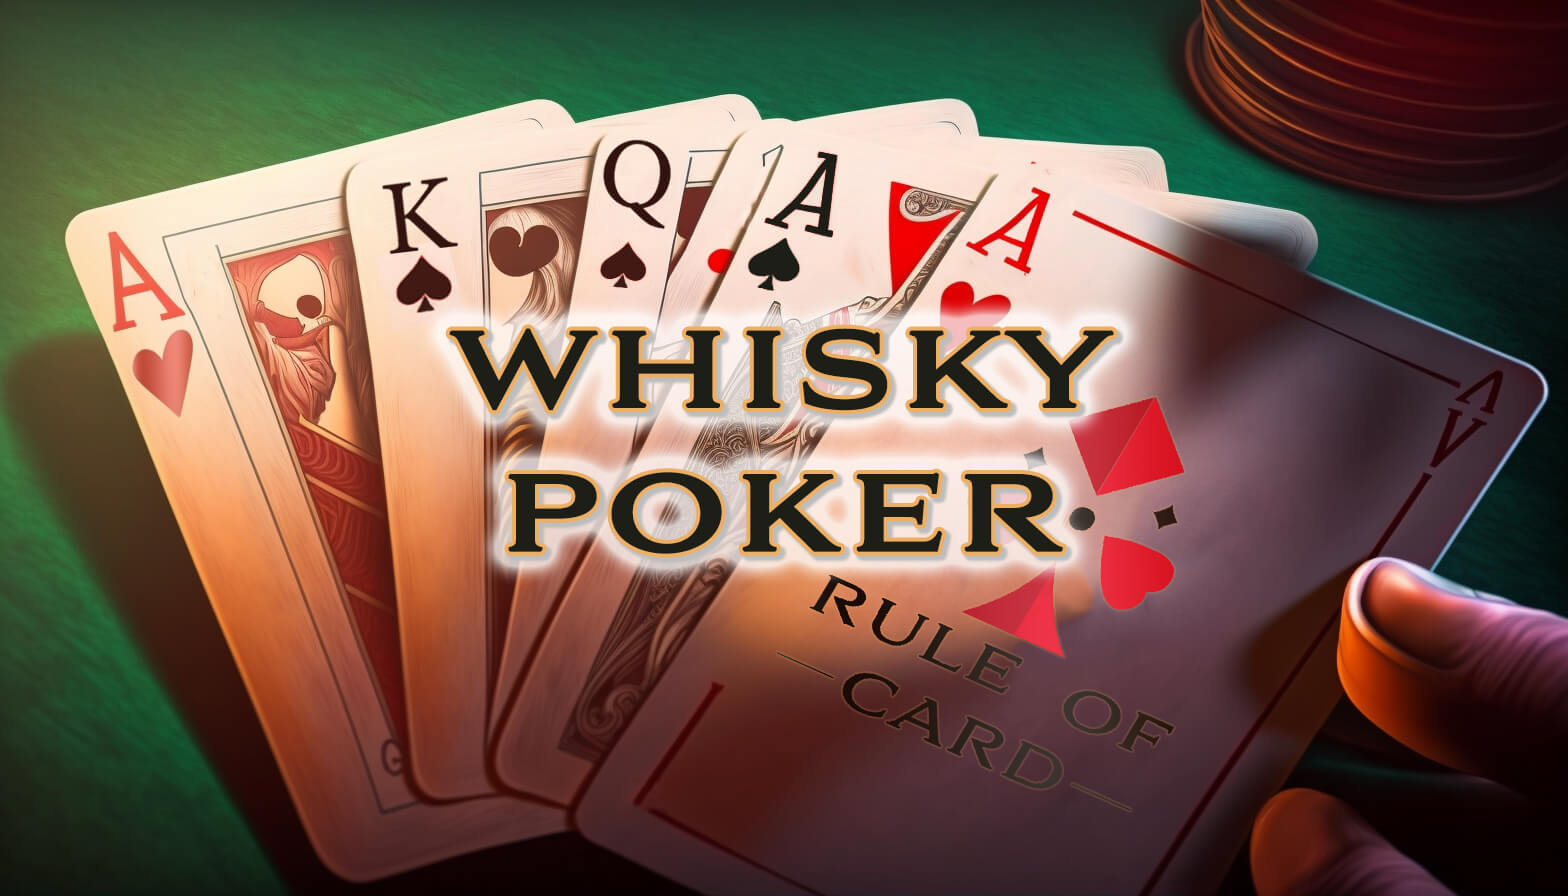 Playing the card game Whisky Poker